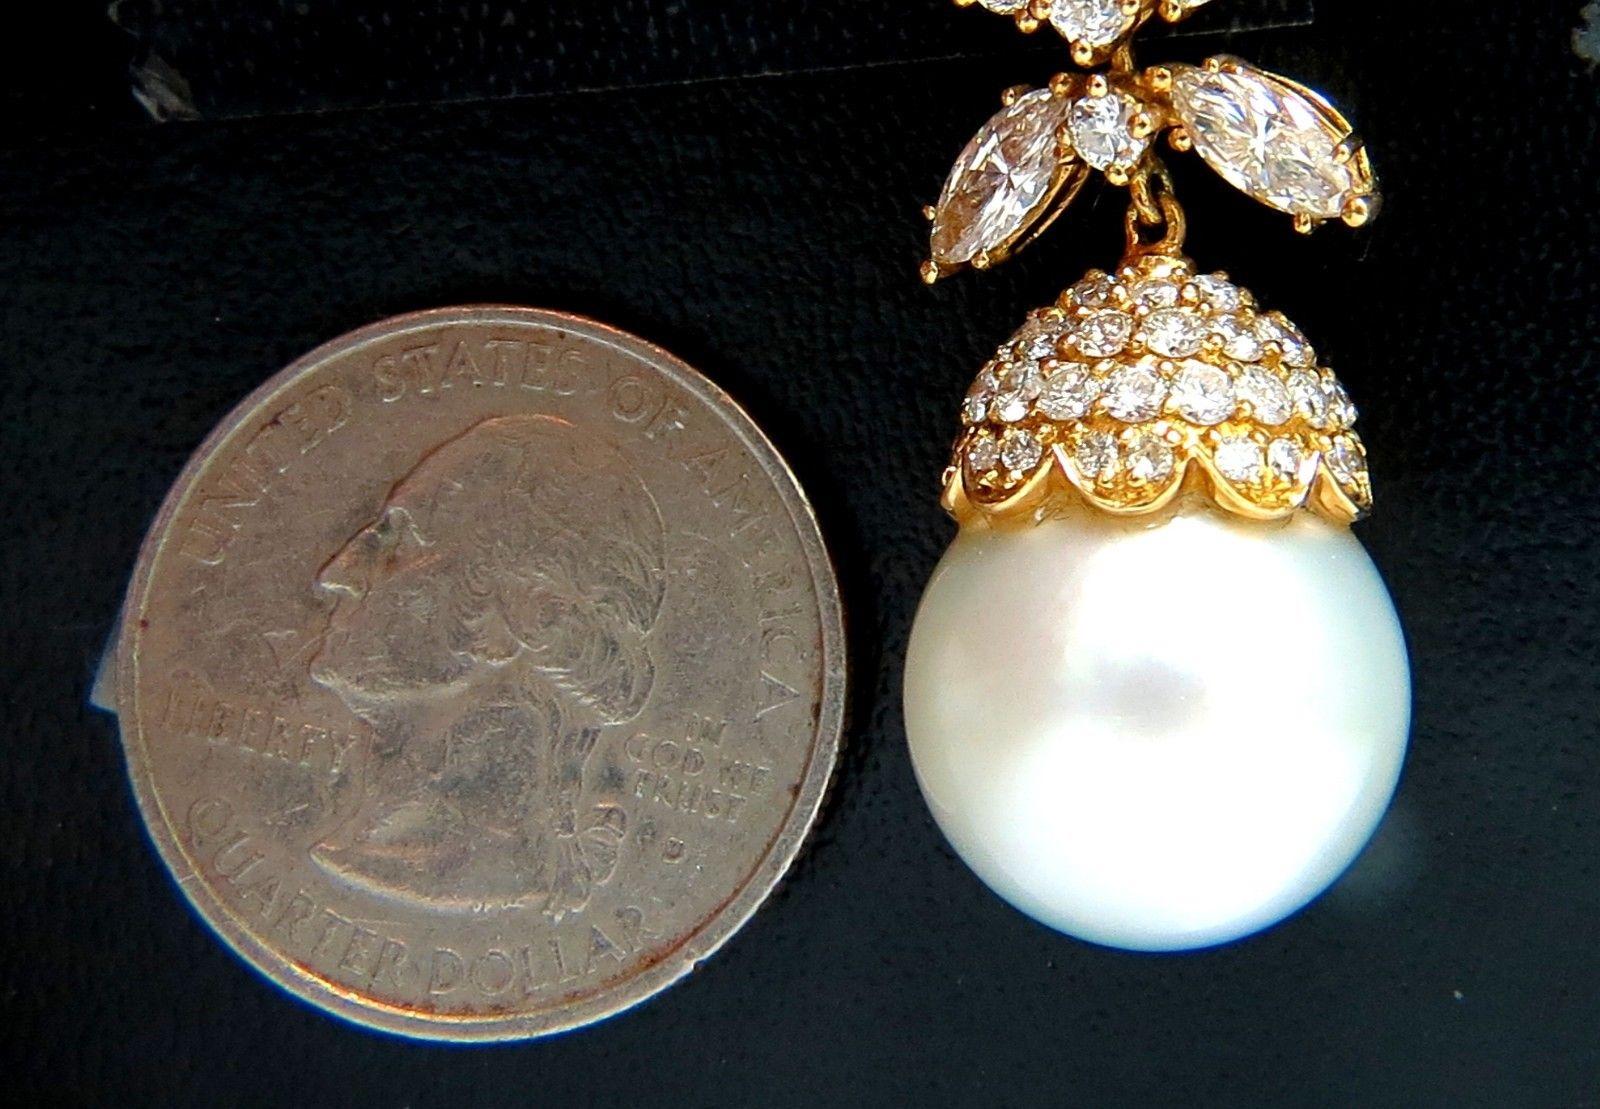 Drop Dangle.

15.6mm natural South Seas Pearls,

White luster, Prime AAA

7.50ct. Natural diamonds  

Marquise & Rounds, Full cut brilliants.

G- color Vs-2 Clarity. 

Secure Lever Backs

Excellent detail.

18kt. yellow gold

Pearls within pretty